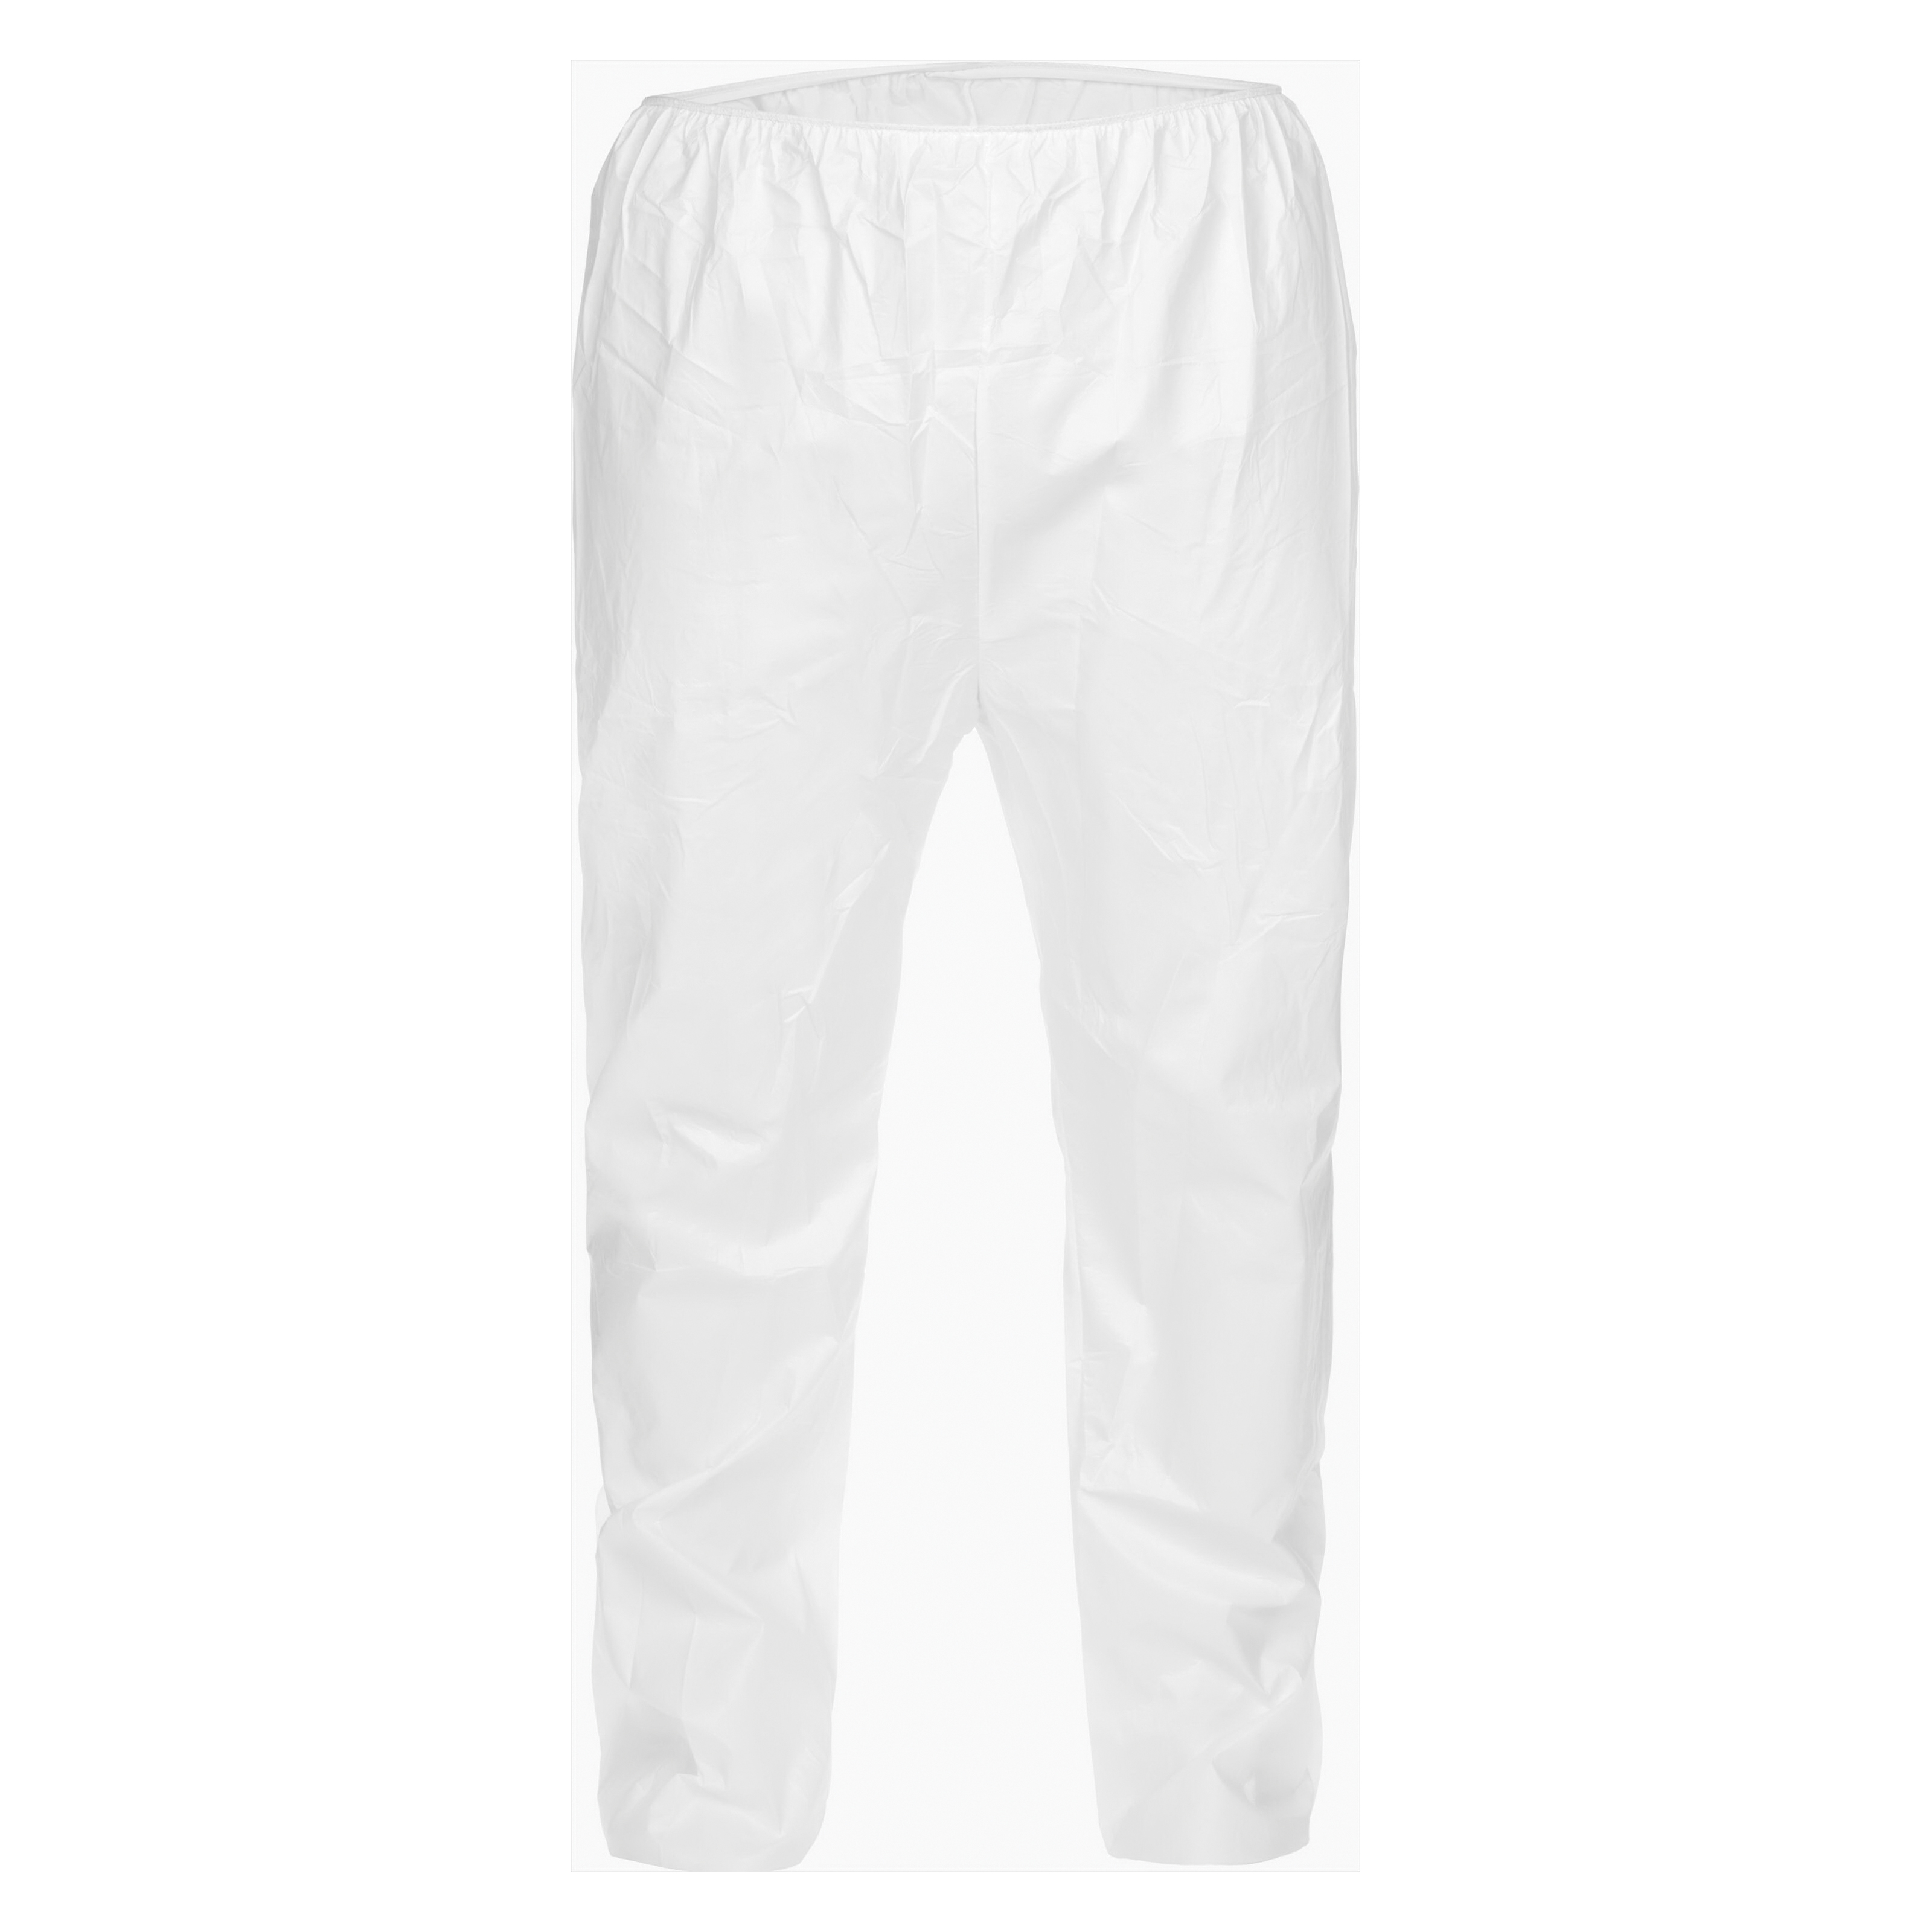 Lakeland® CTL301-XL Disposable Pant, XL, White, MicroMax® NS, Elastic Closure, Resists: Spills and Splashes